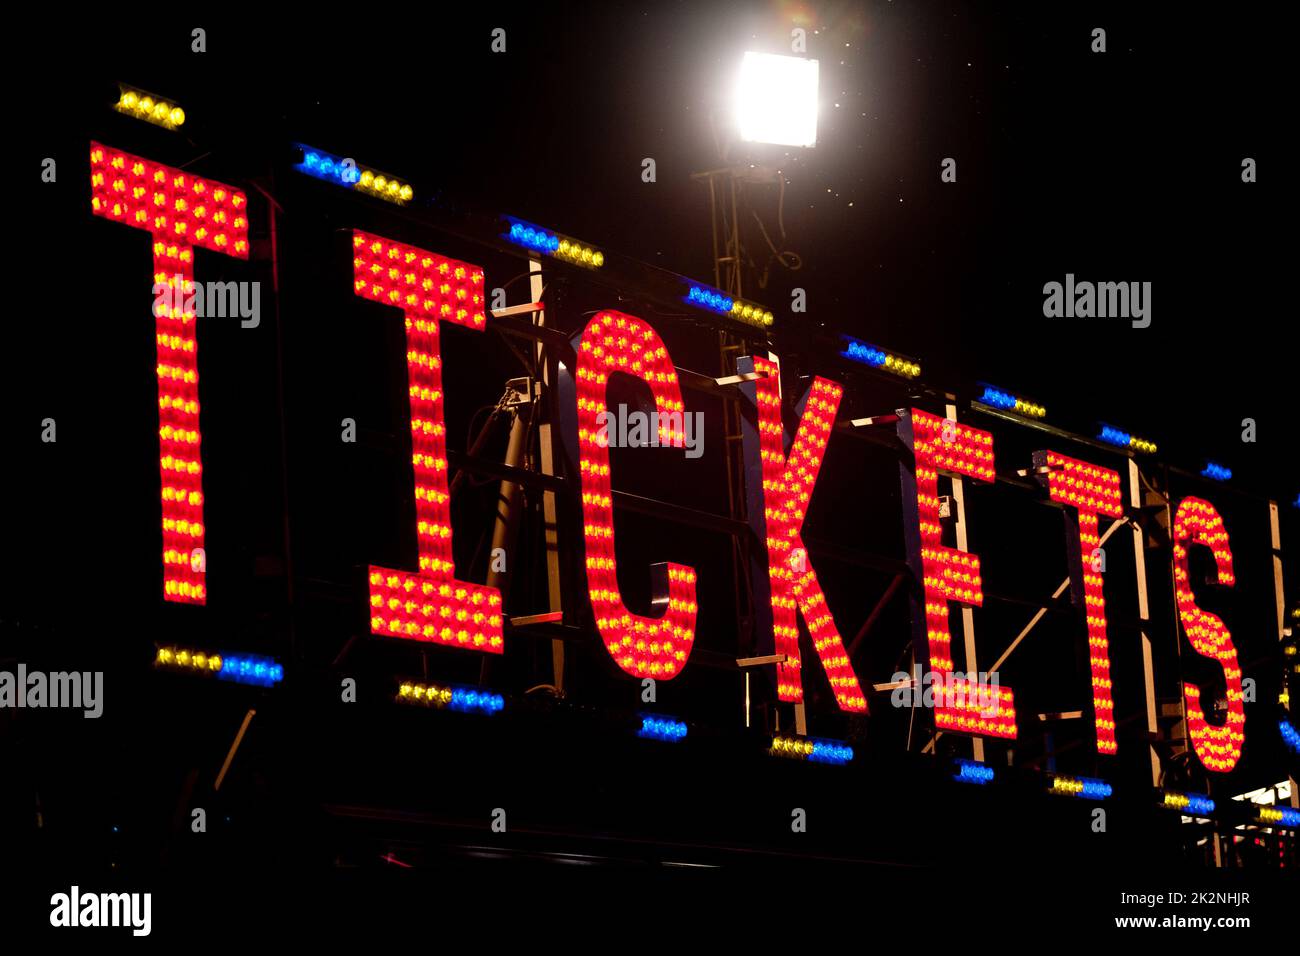 tickets neon sign in the night Stock Photo